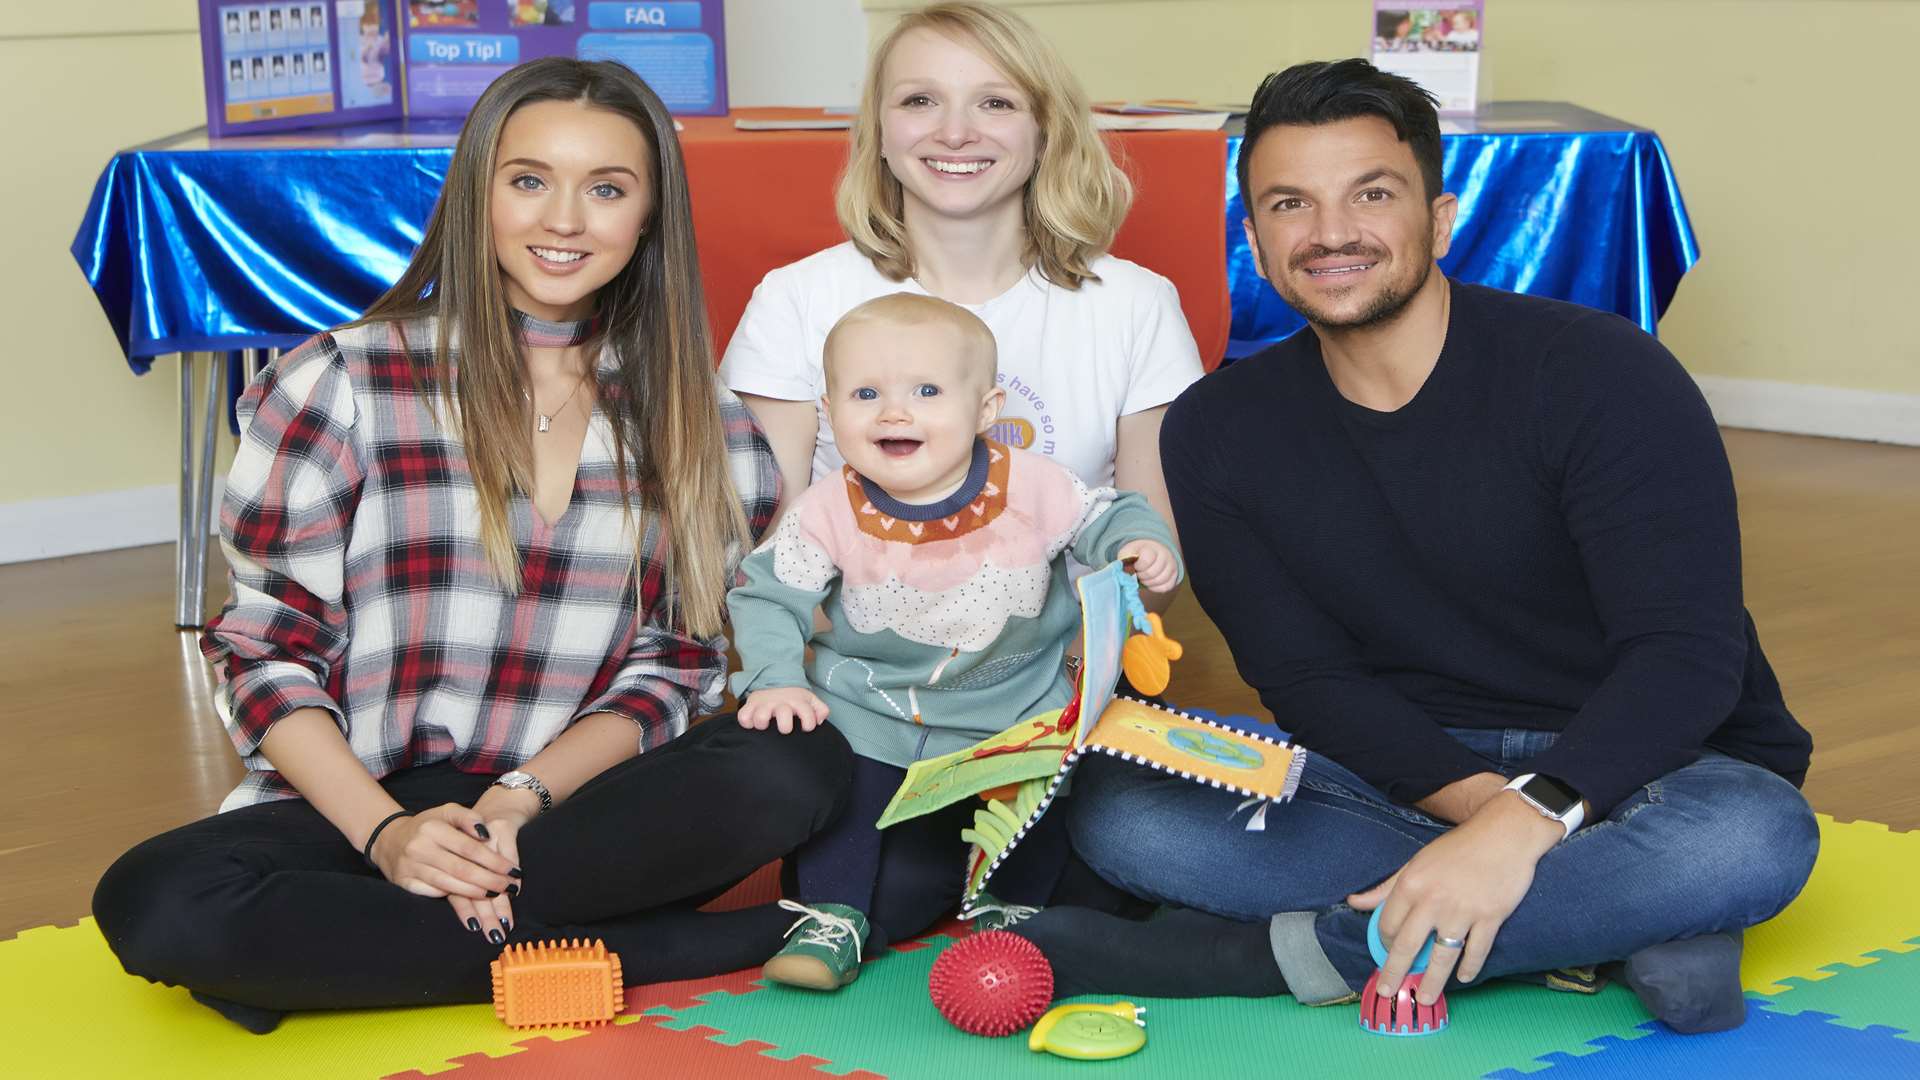 Rebecca Oakley taught Peter and Emily Andre about the sign language she uses with her own baby. Picture: npower